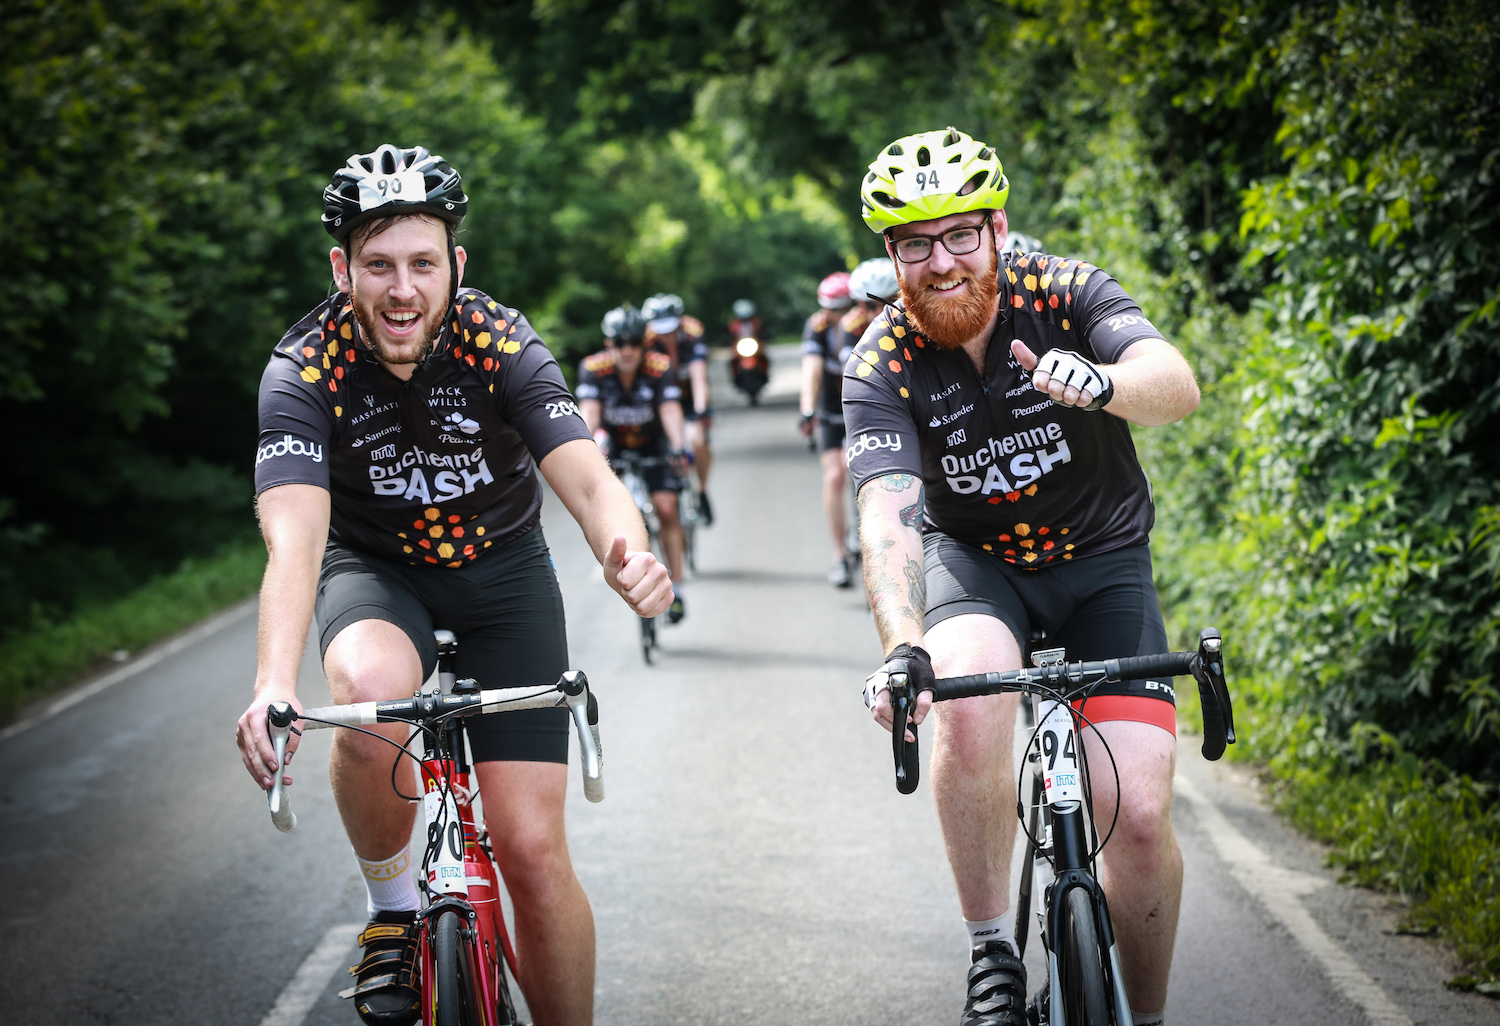 Two Duchenne Dash cyclists on the road with their thumbs up